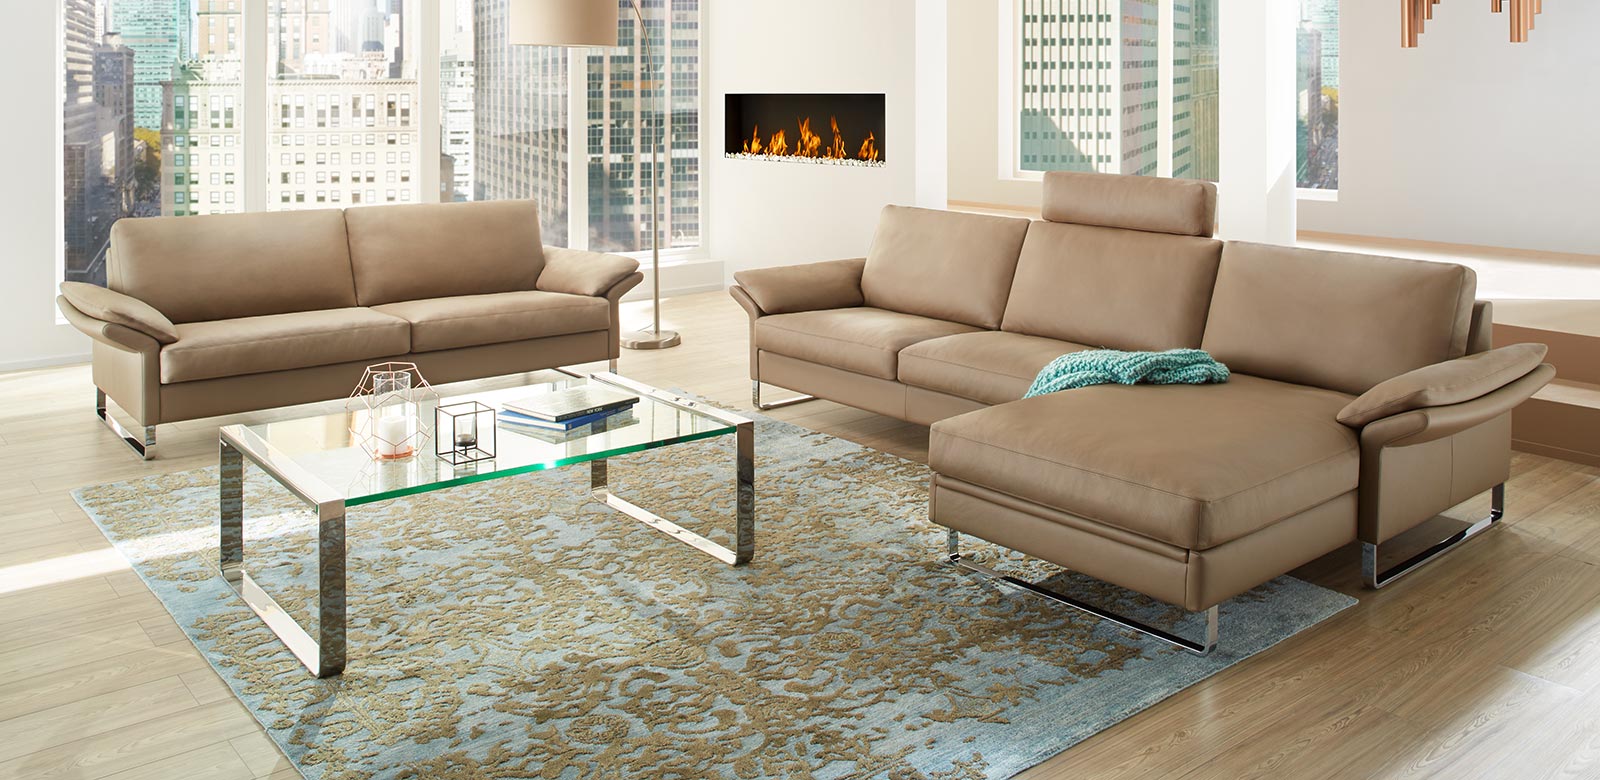 CL960 sofa and longchair combination in cream leather, ornate carpet and fireplace in the living room of a high-rise apartment